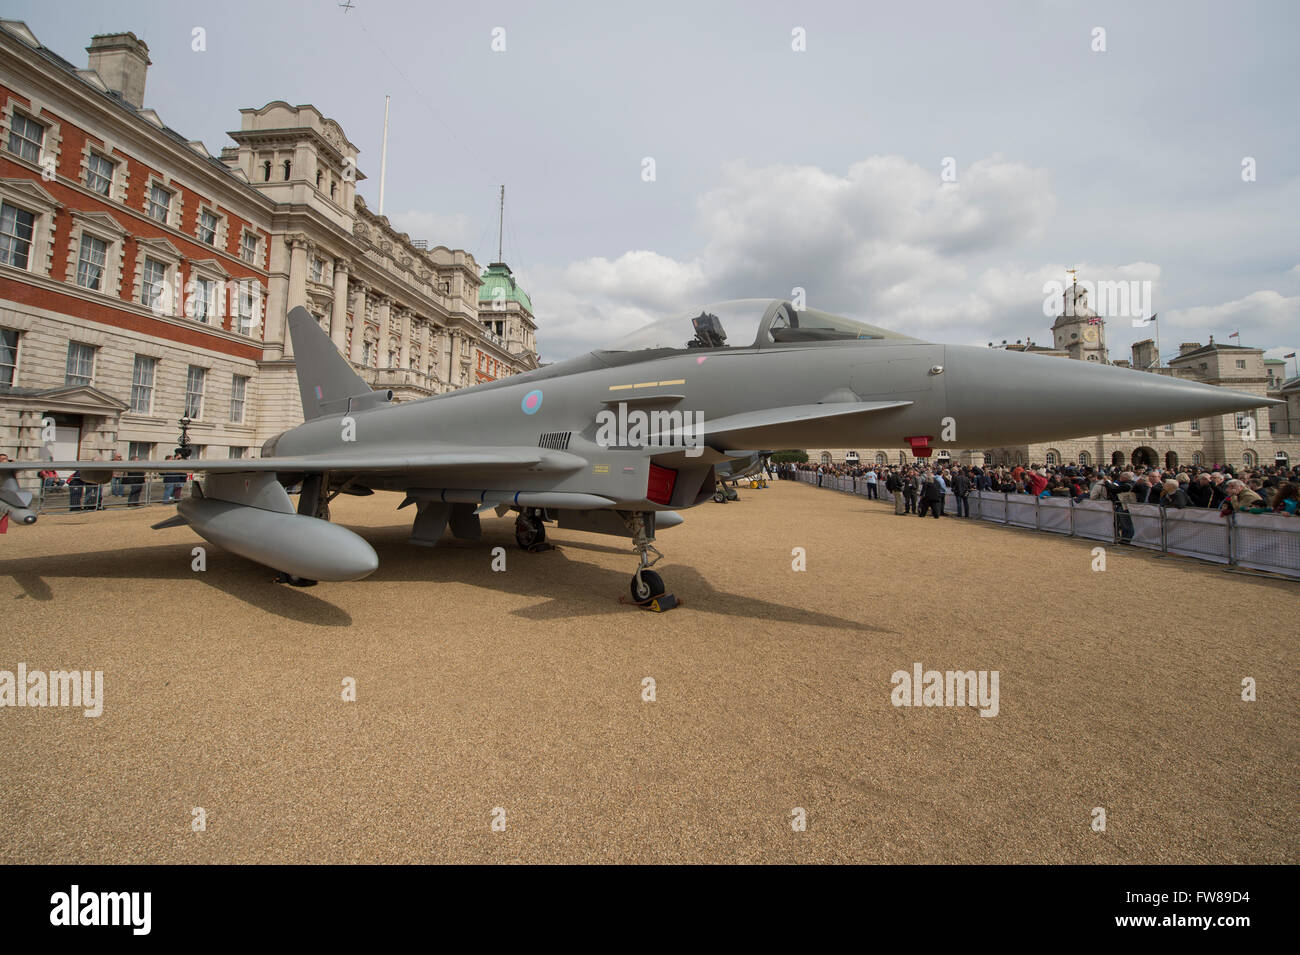 Horse Guards Parade, London, UK. 1st April, 2016. A modern-day Eurofighter Typhoon, iconic second world war Spitfire fighter and world war 1 Sopwith Snipe in central London to celebrate the RAF Museum’s campaign offering members of the public the opportunity to have their name written on the wings of an RAF Red Arrows Hawk Jet that will fly through the 2017 display season. Credit:  Malcolm Park editorial / Alamy Live News. Stock Photo